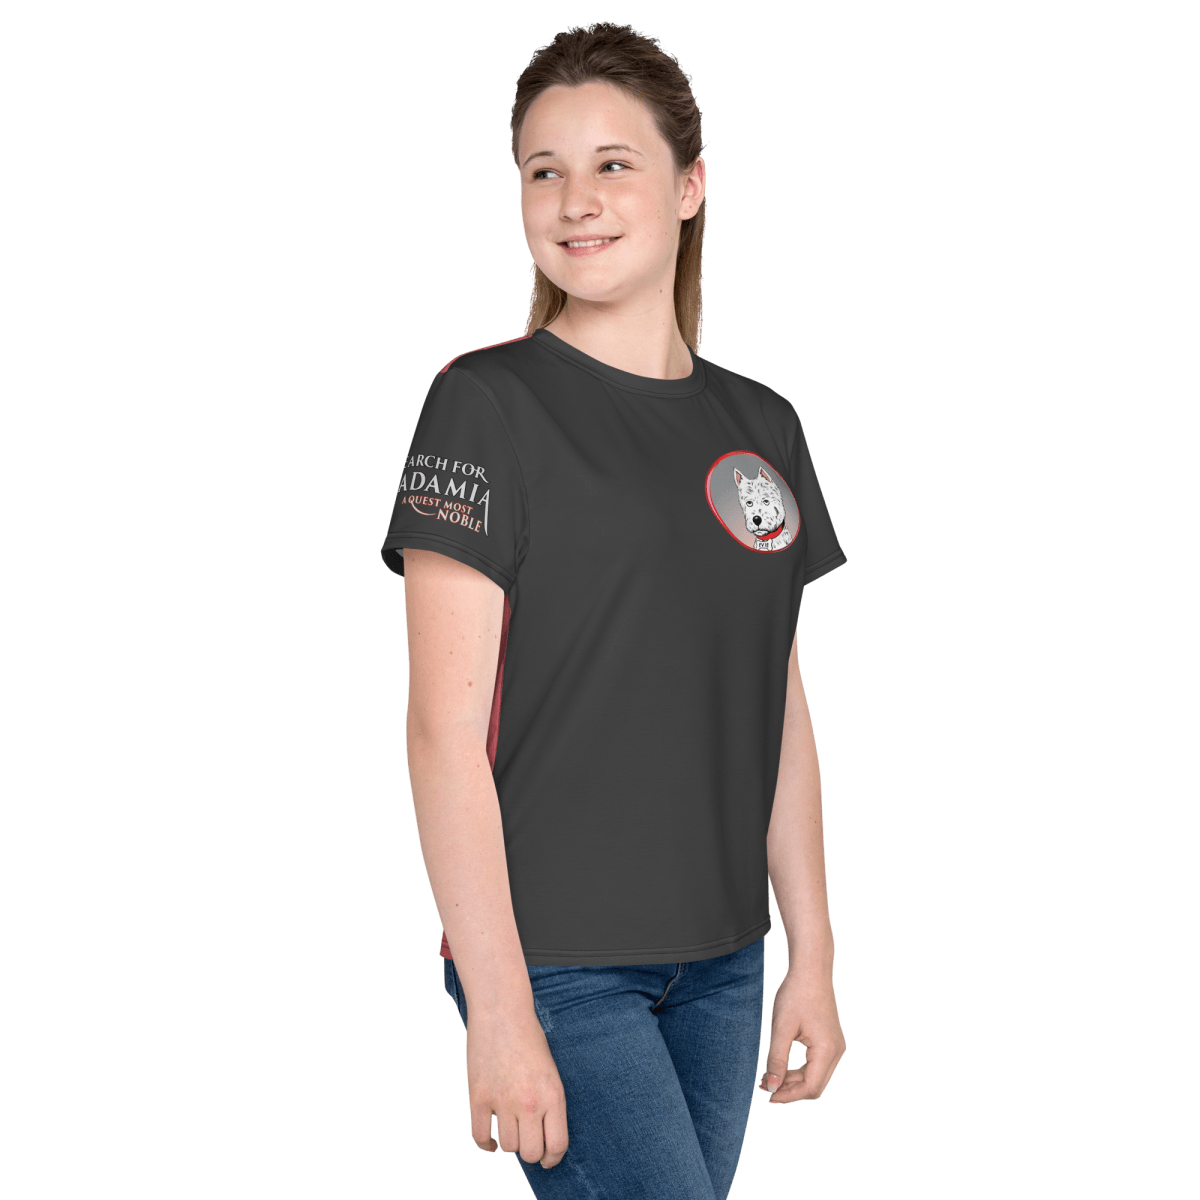 Evie Knows Magic Youth Crew Neck T-shirt - RG Halleck